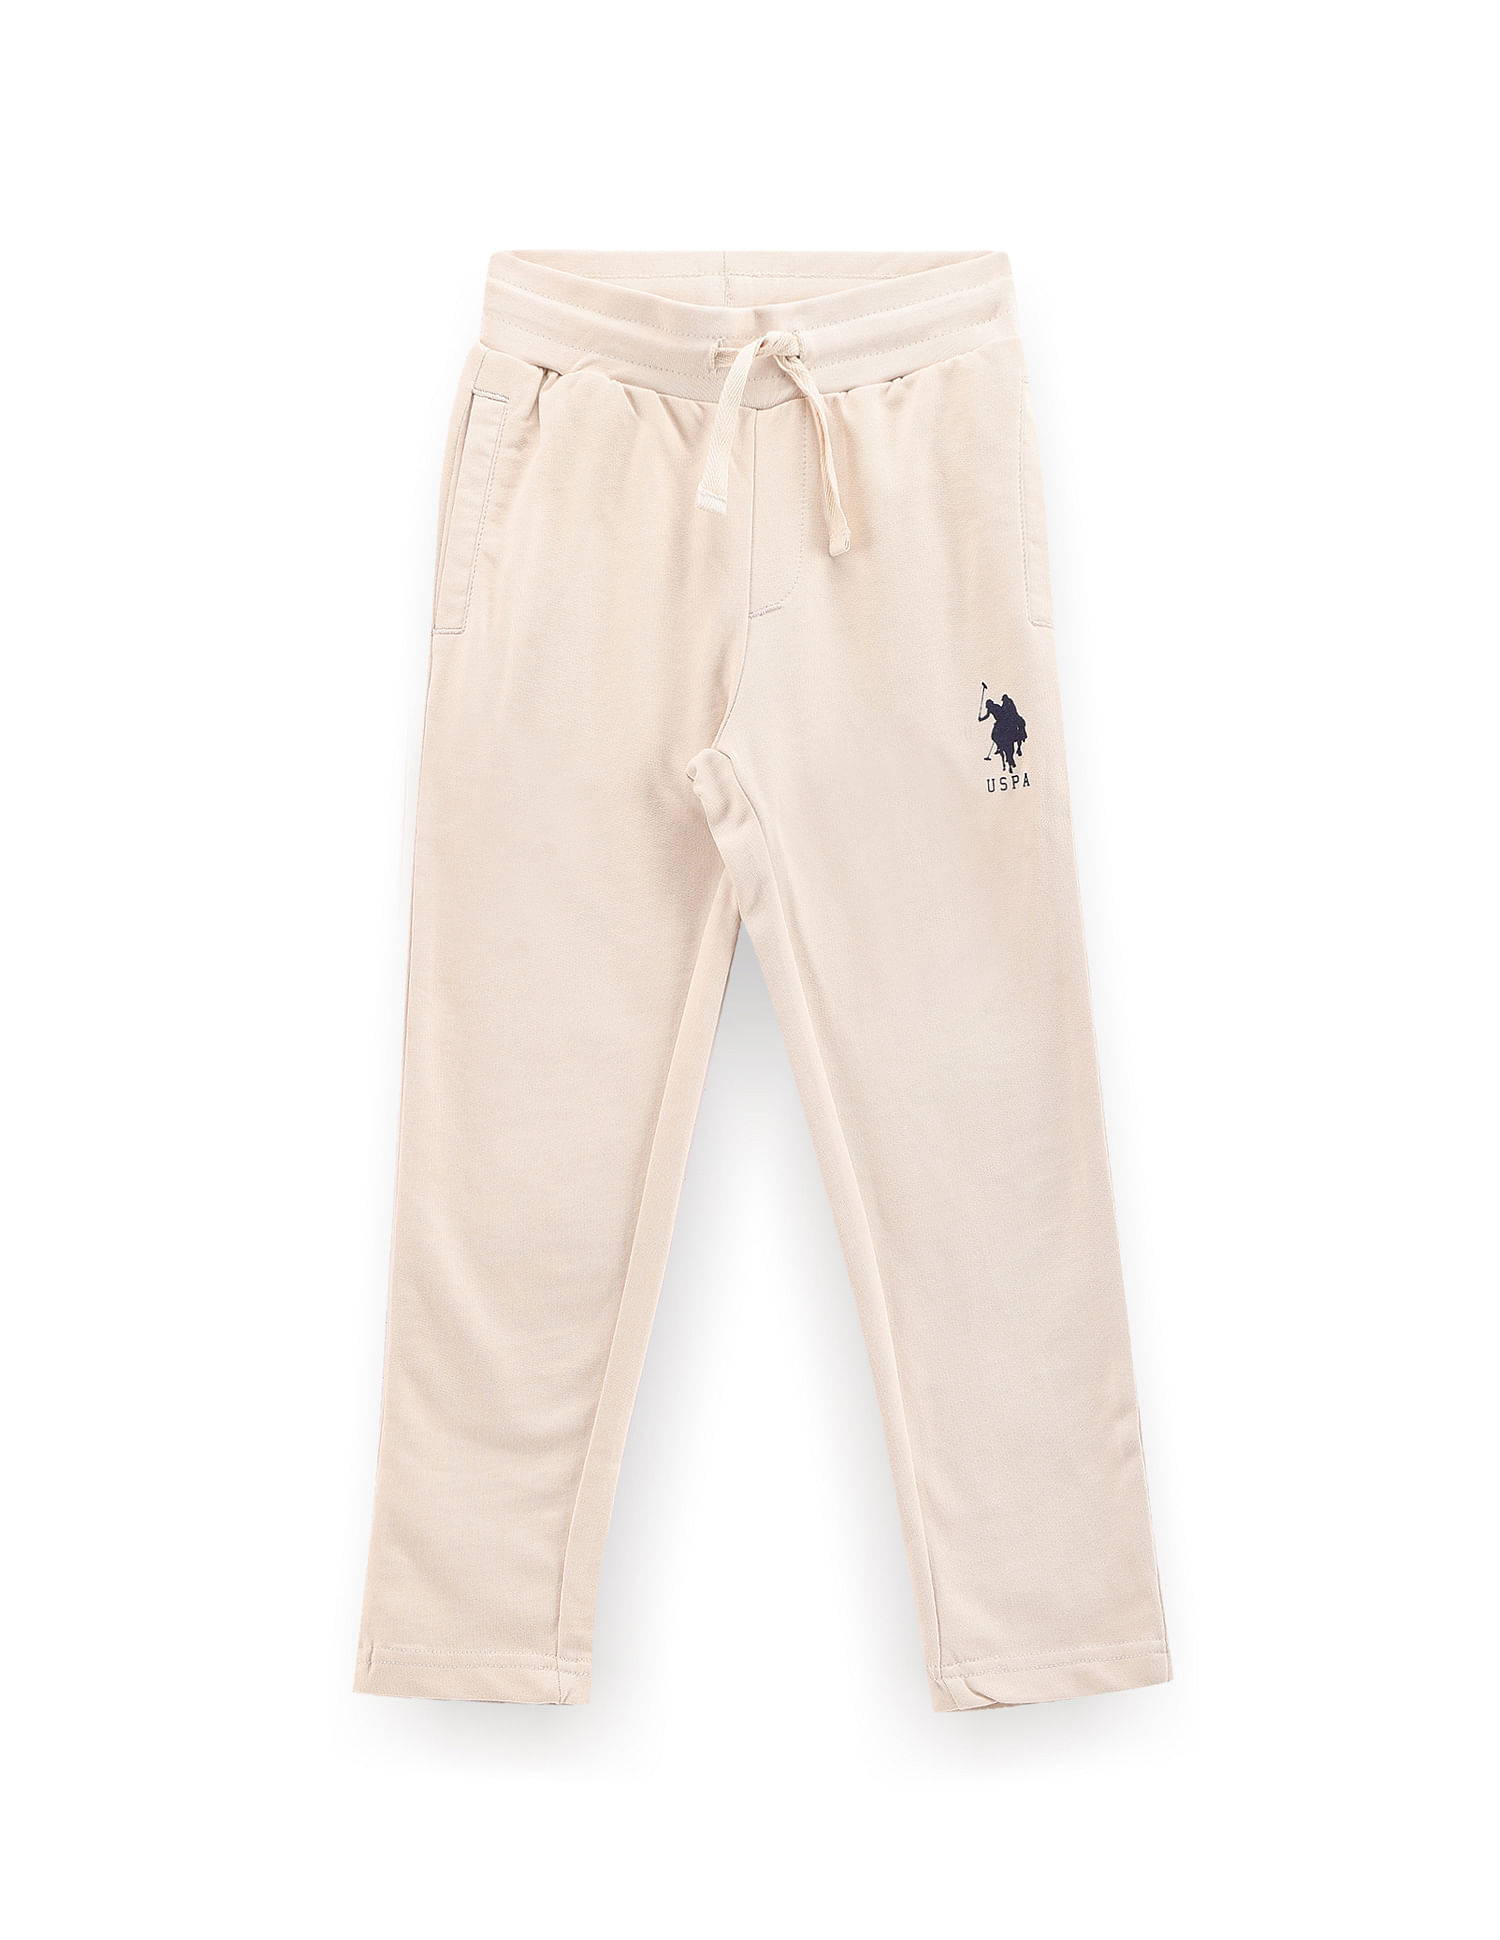 Buy U.S. Polo Assn. Flat Front Solid Trousers - NNNOW.com